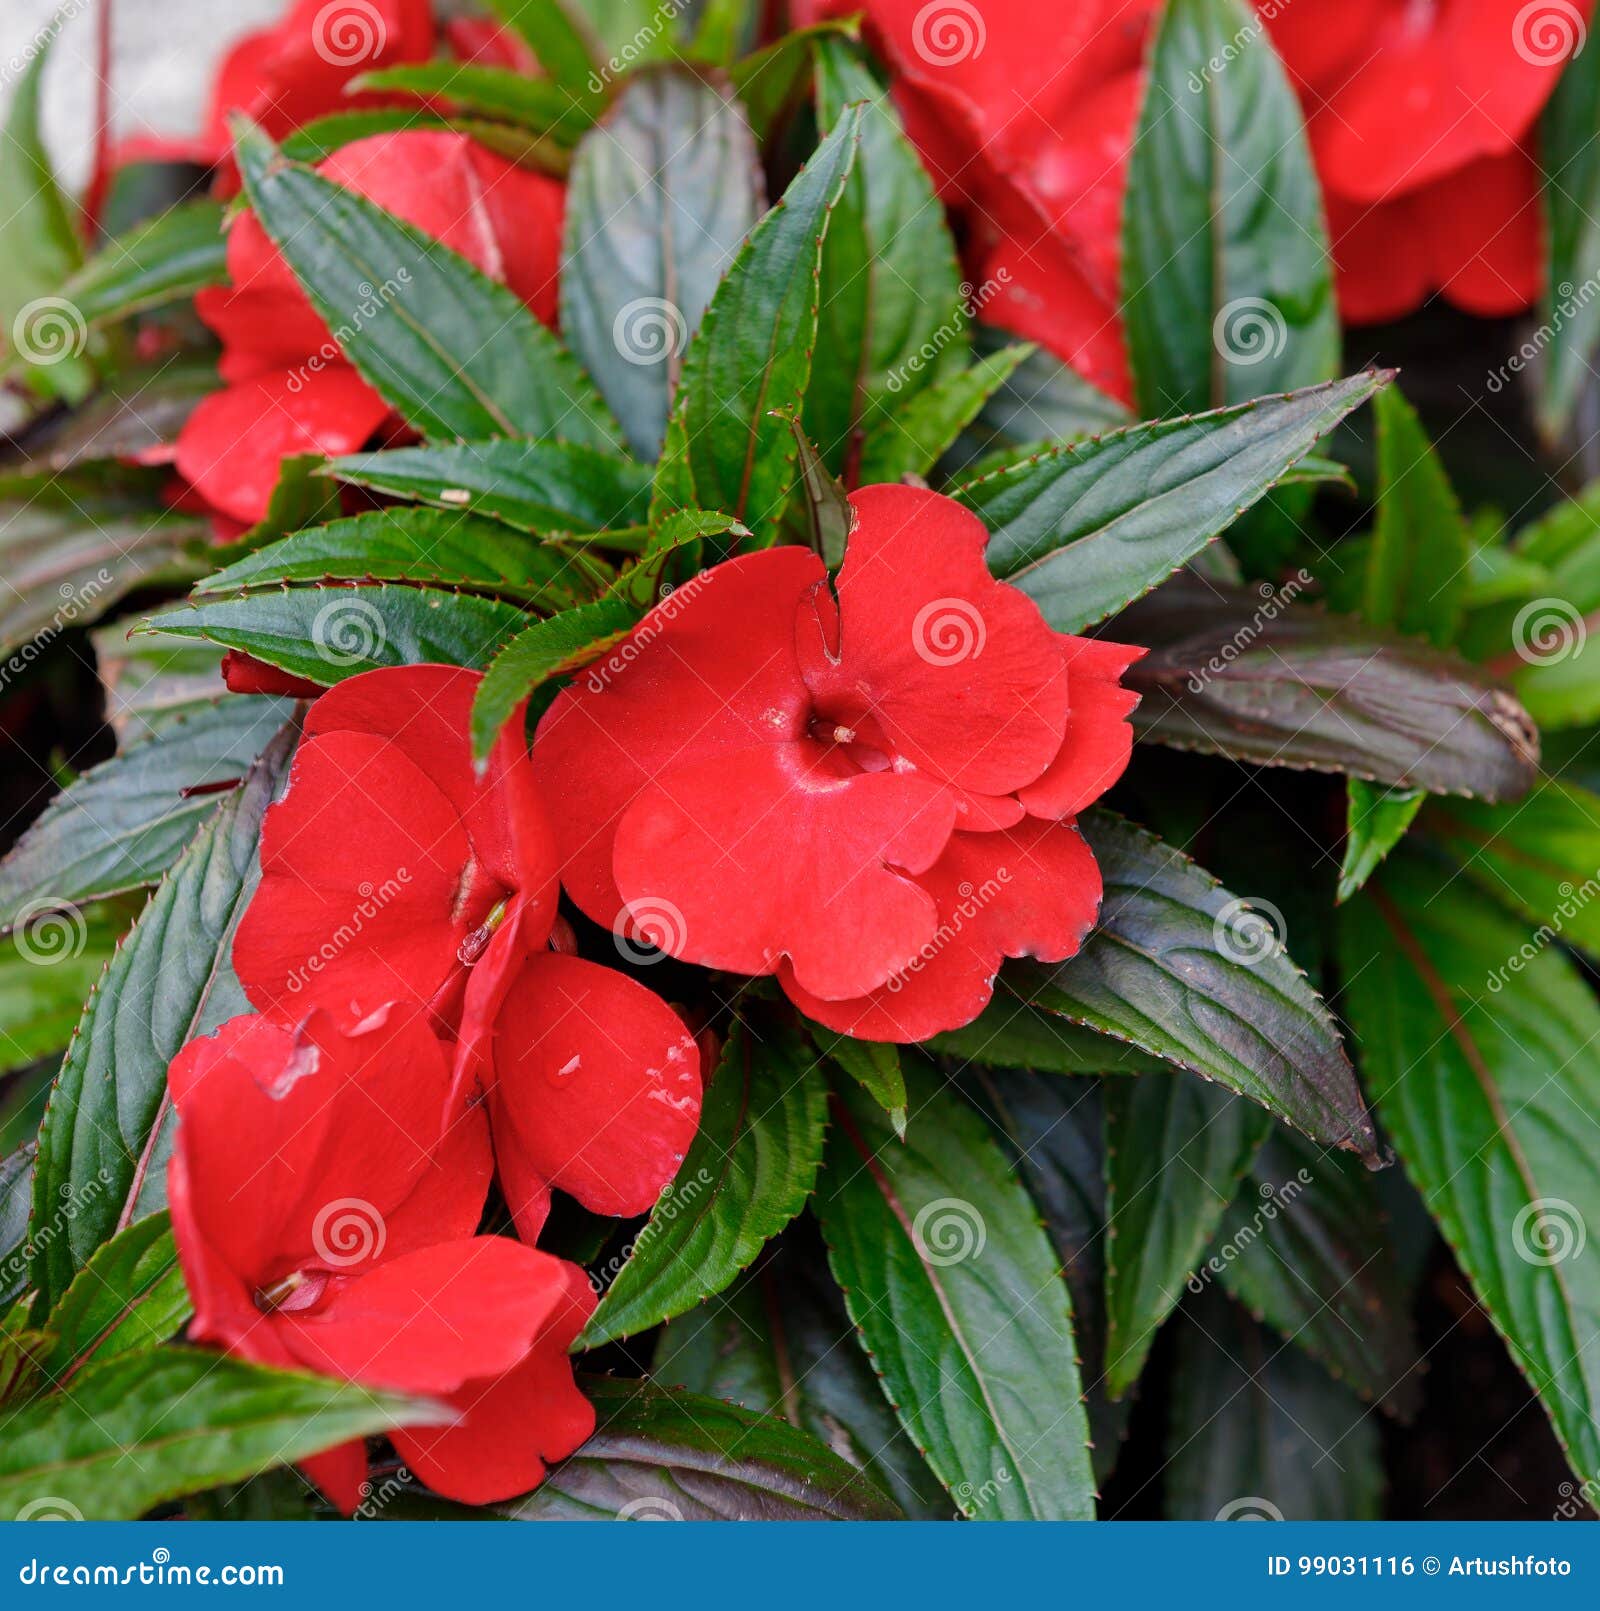 Red New Guinea Impatiens Flowers in Pots Stock Photo - Image of green,  foliage: 99031116